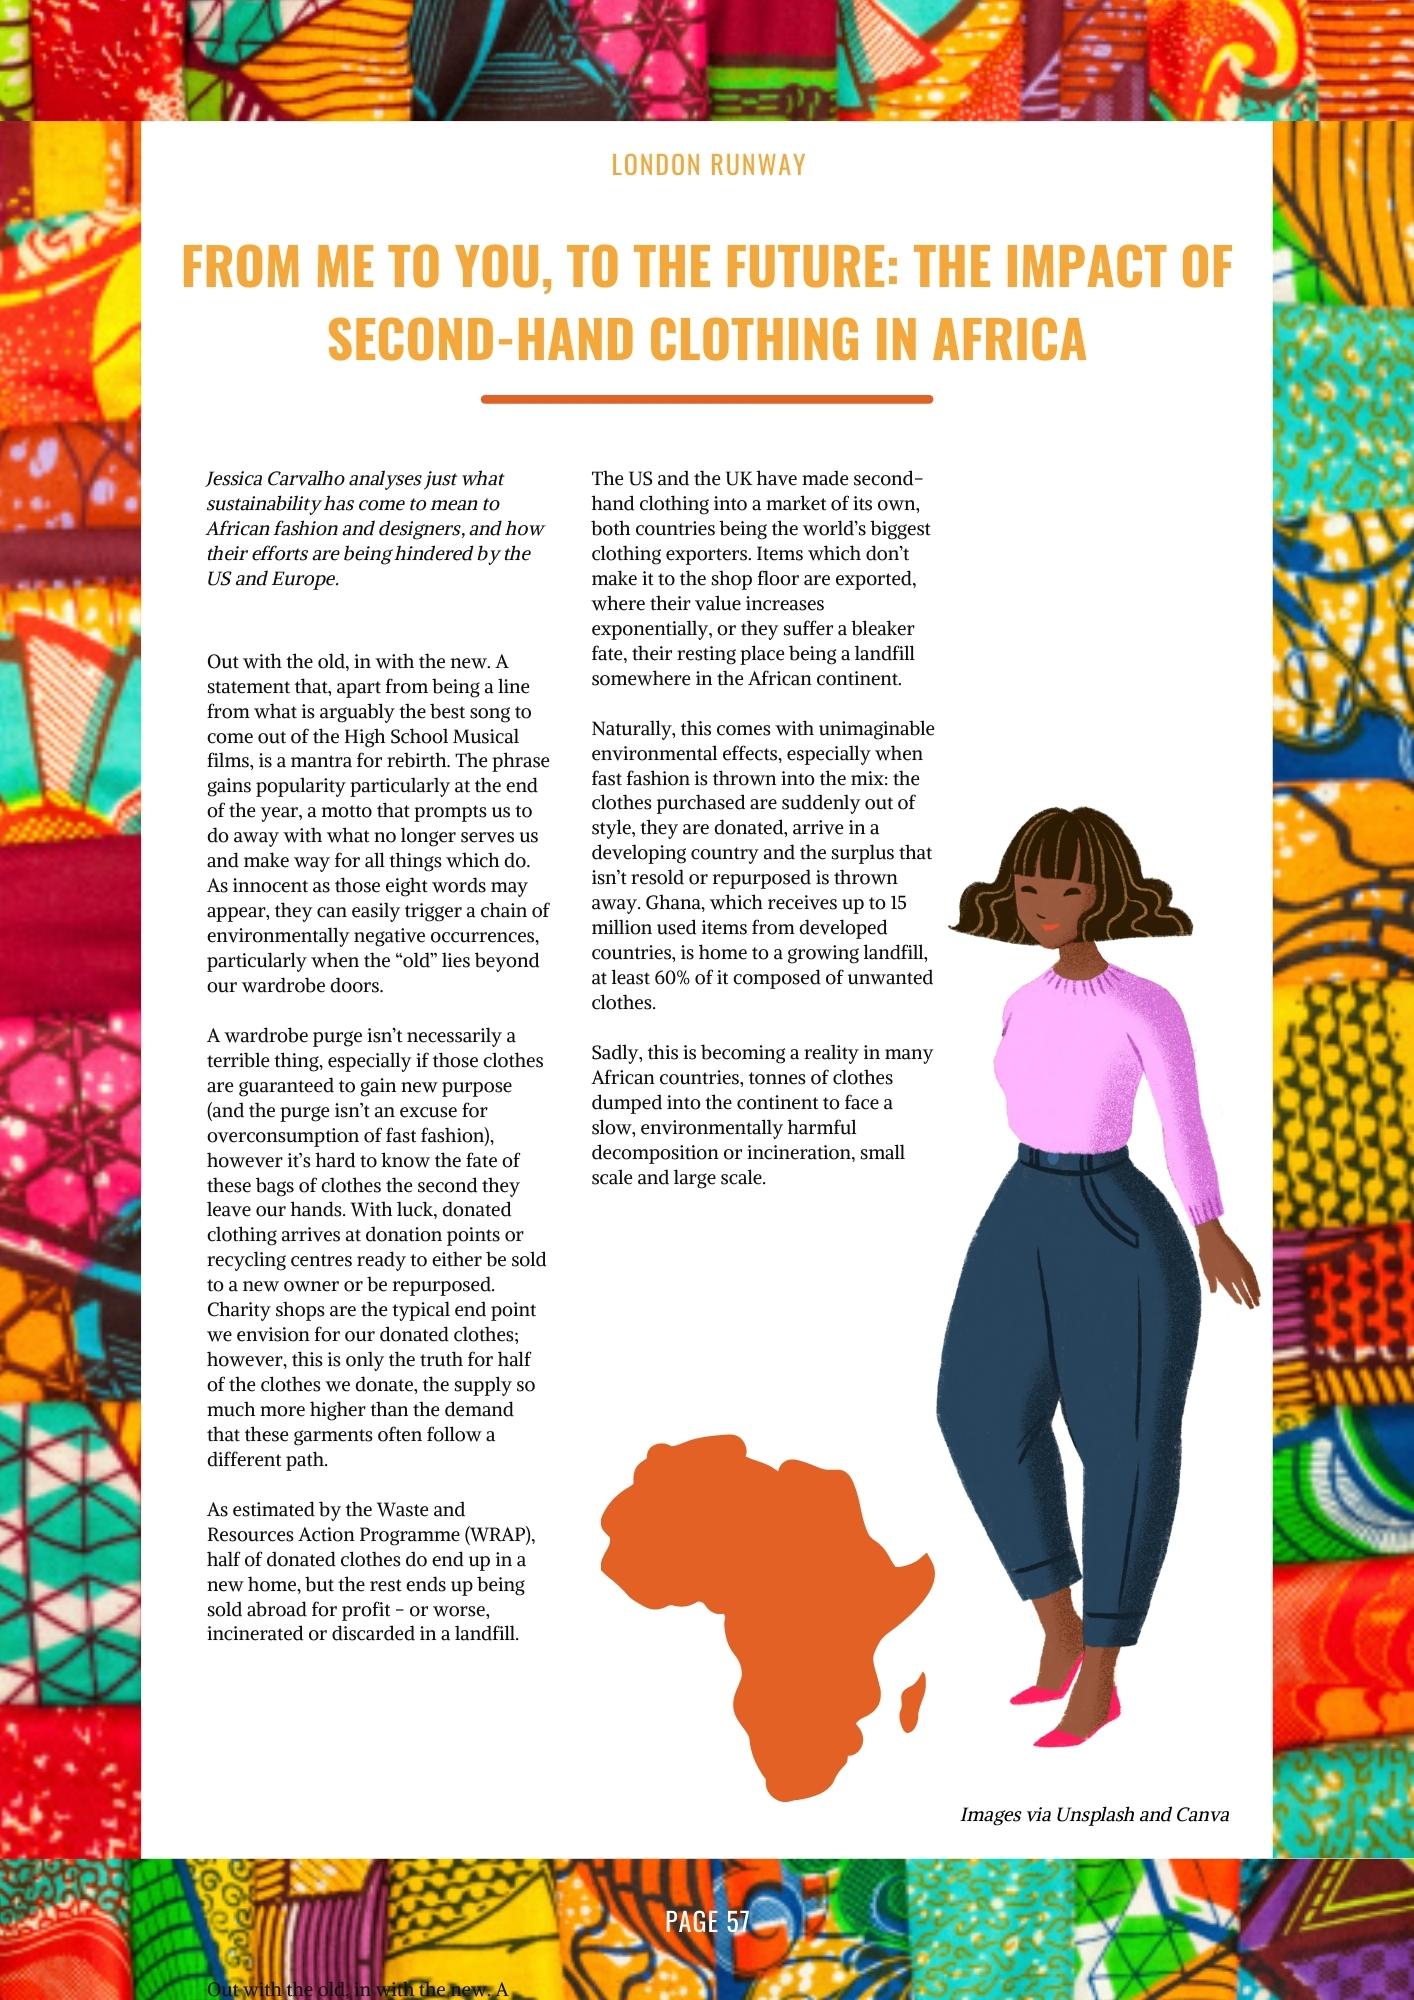 FROM ME TO YOU, TO THE FUTURE: THE IMPACT OF SECOND-HAND CLOTHING IN AFRICA